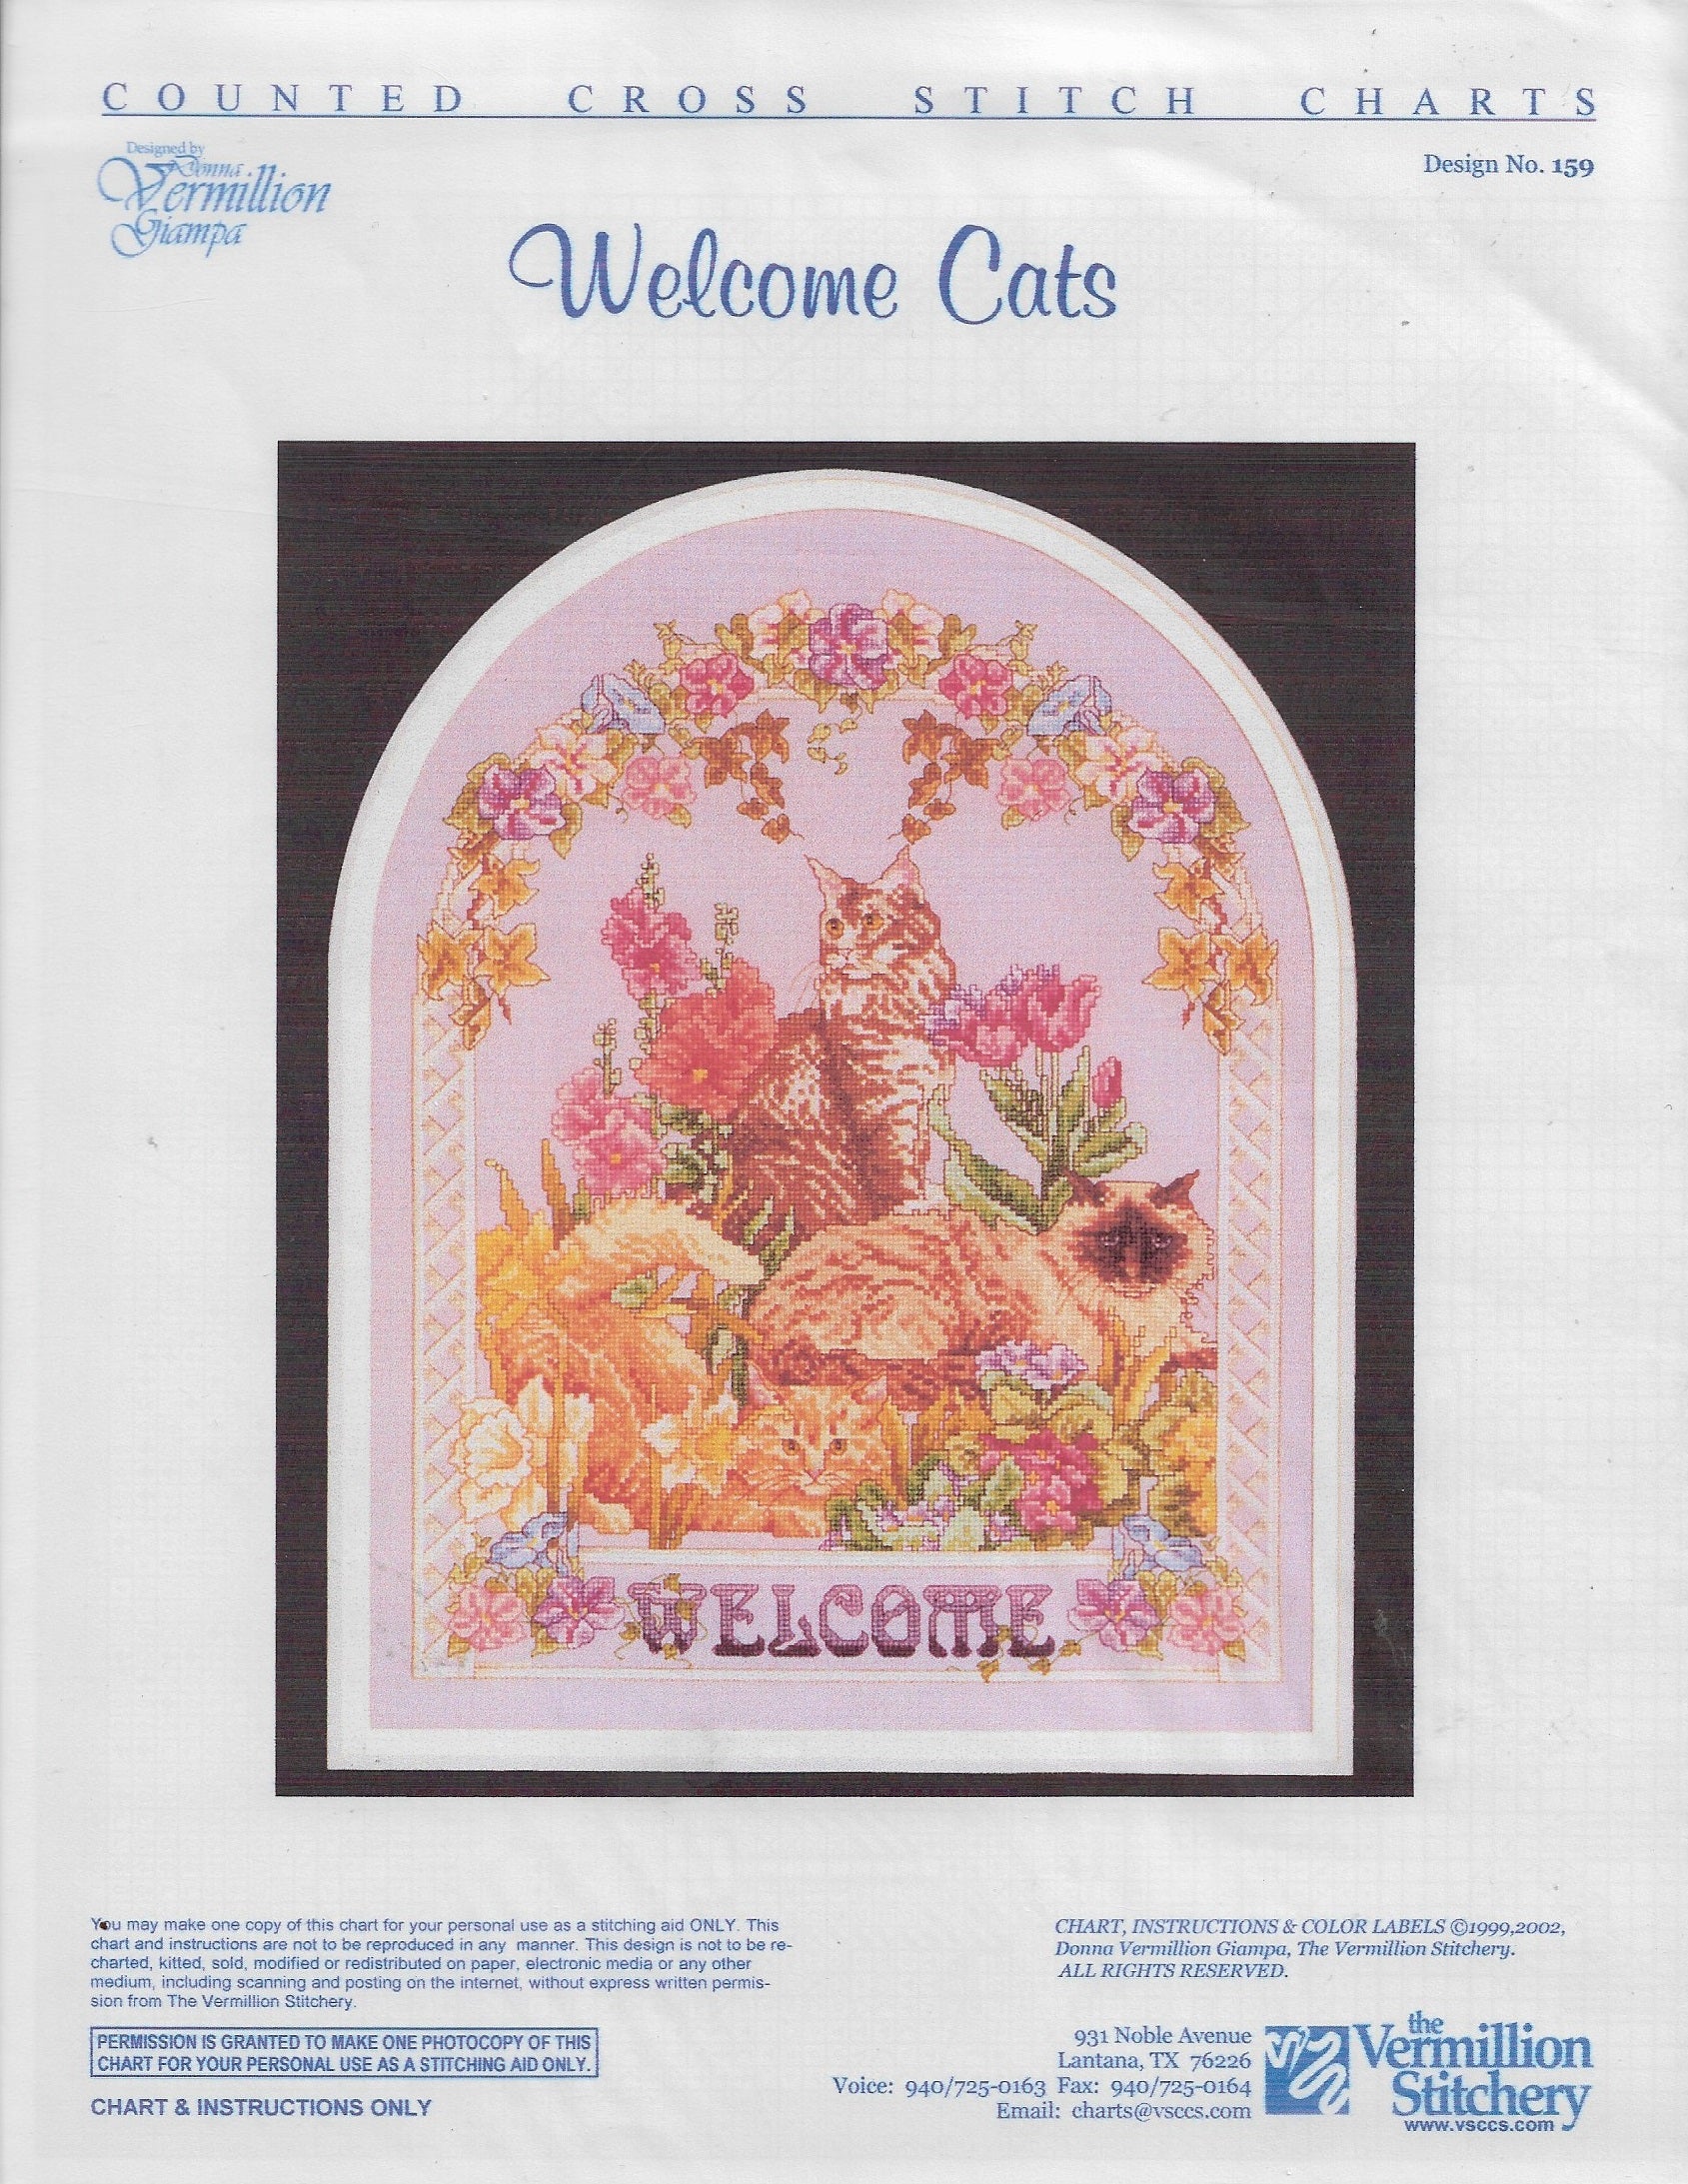 Vermillion Society Welcome Cats cross stitch pattern